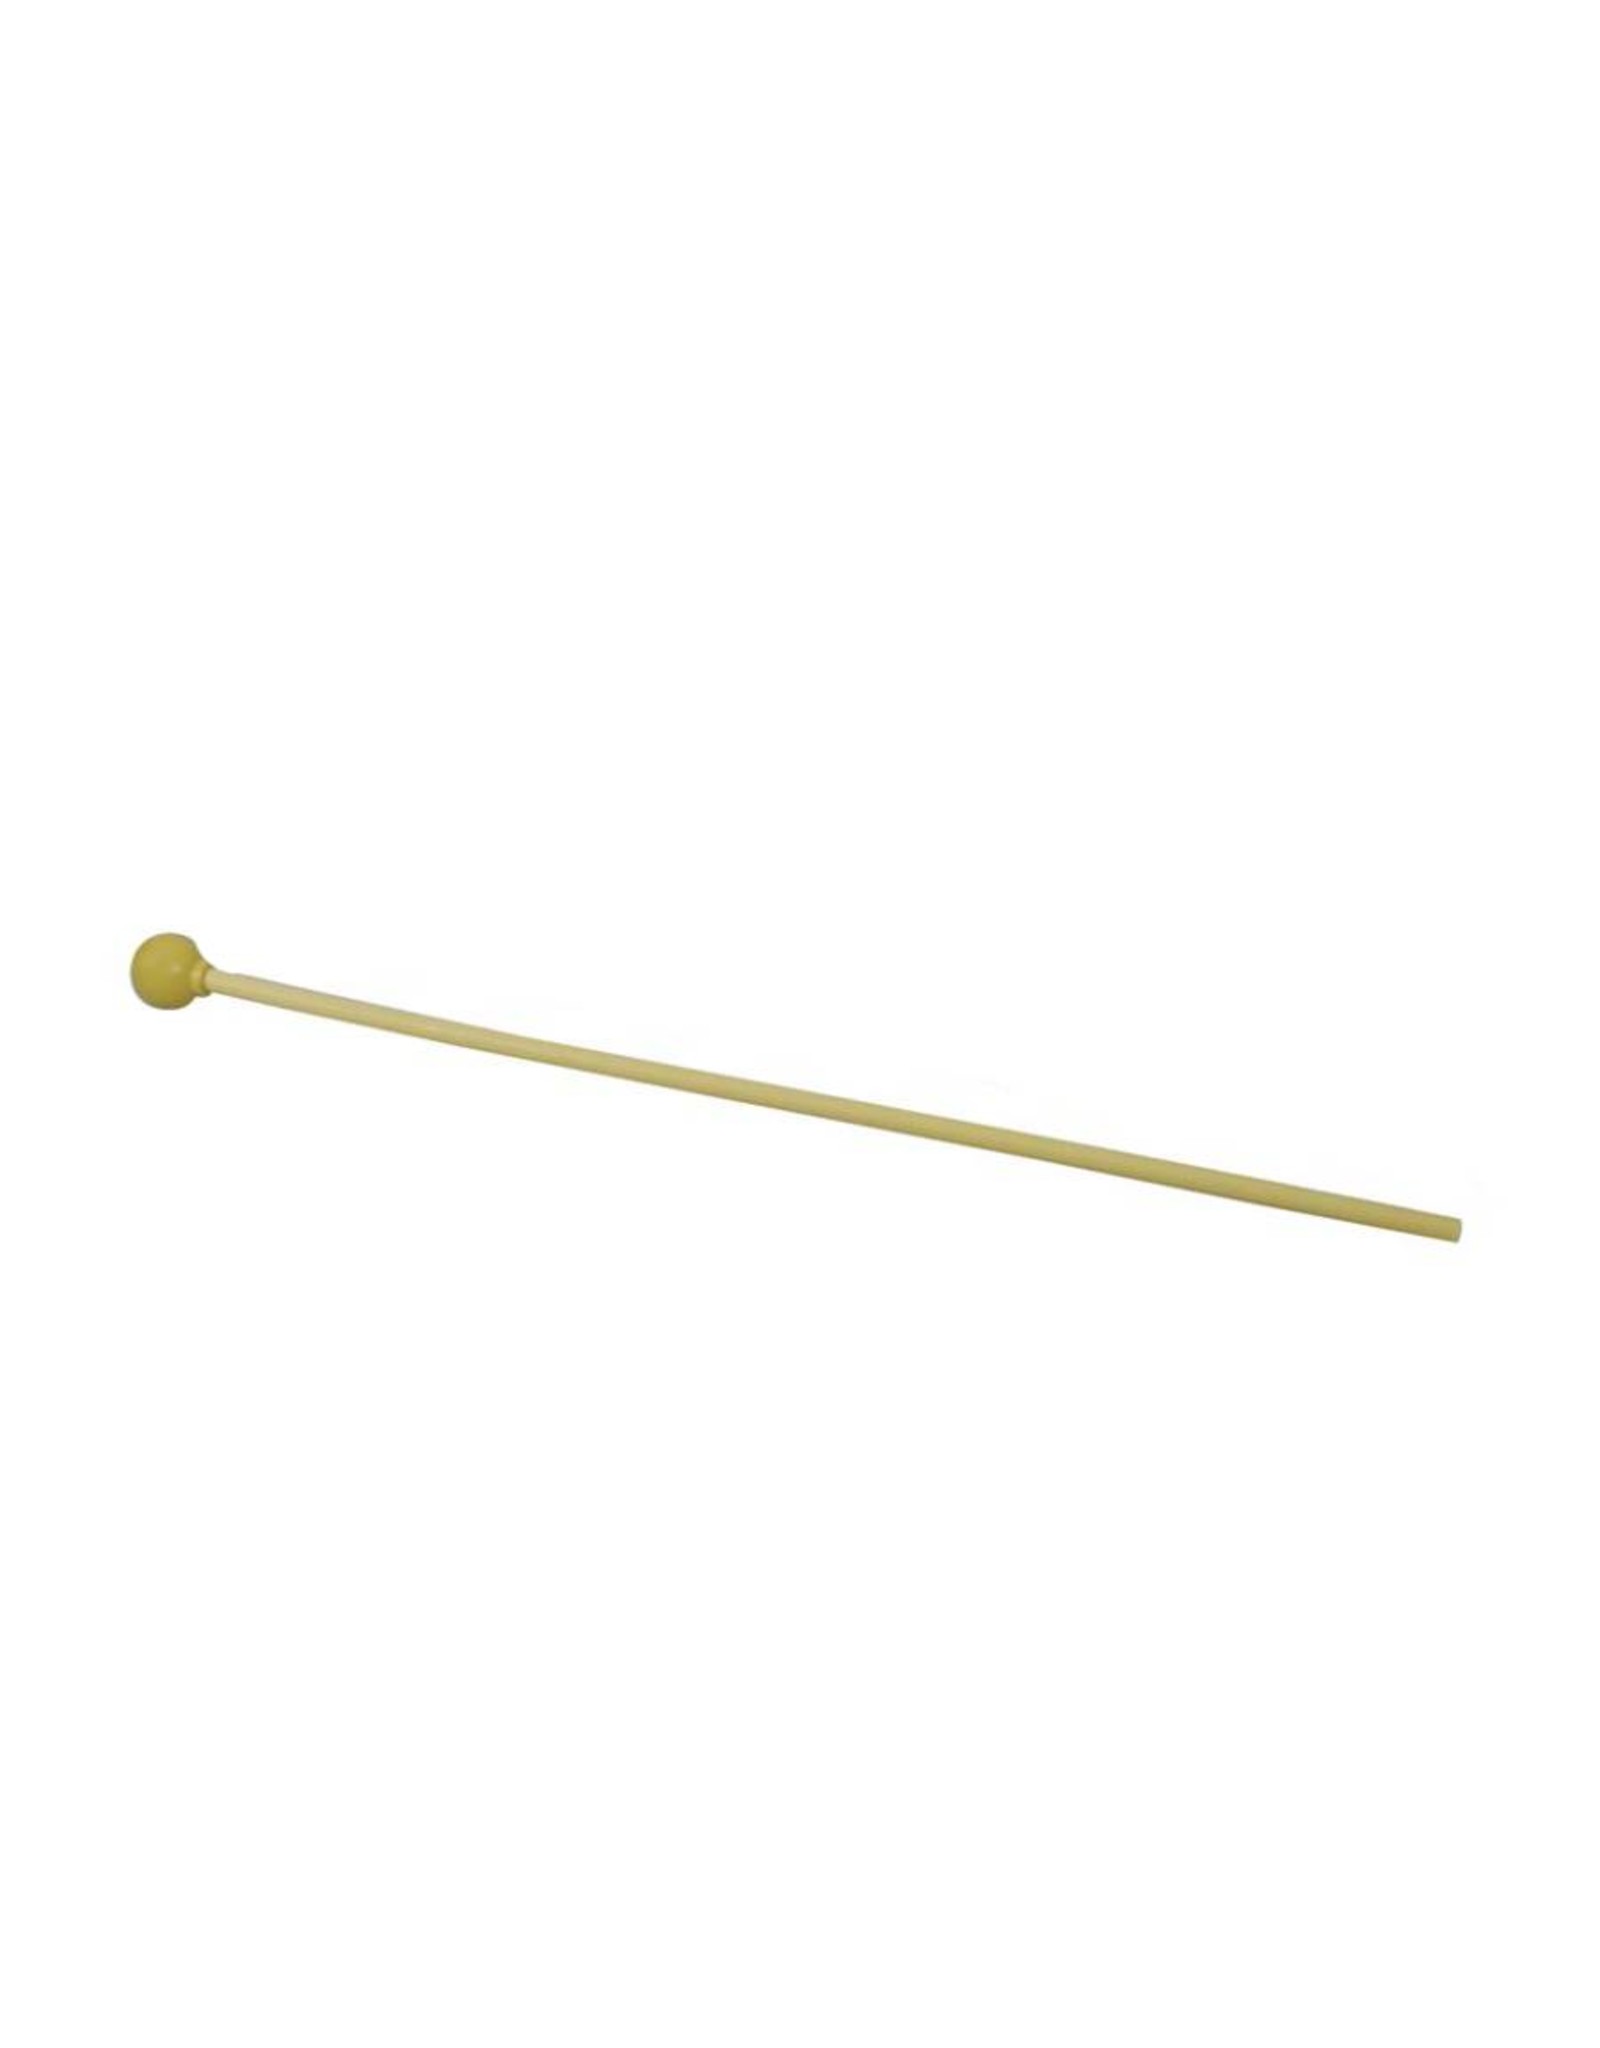 B System PERCUSSION Rubber Mallet soft